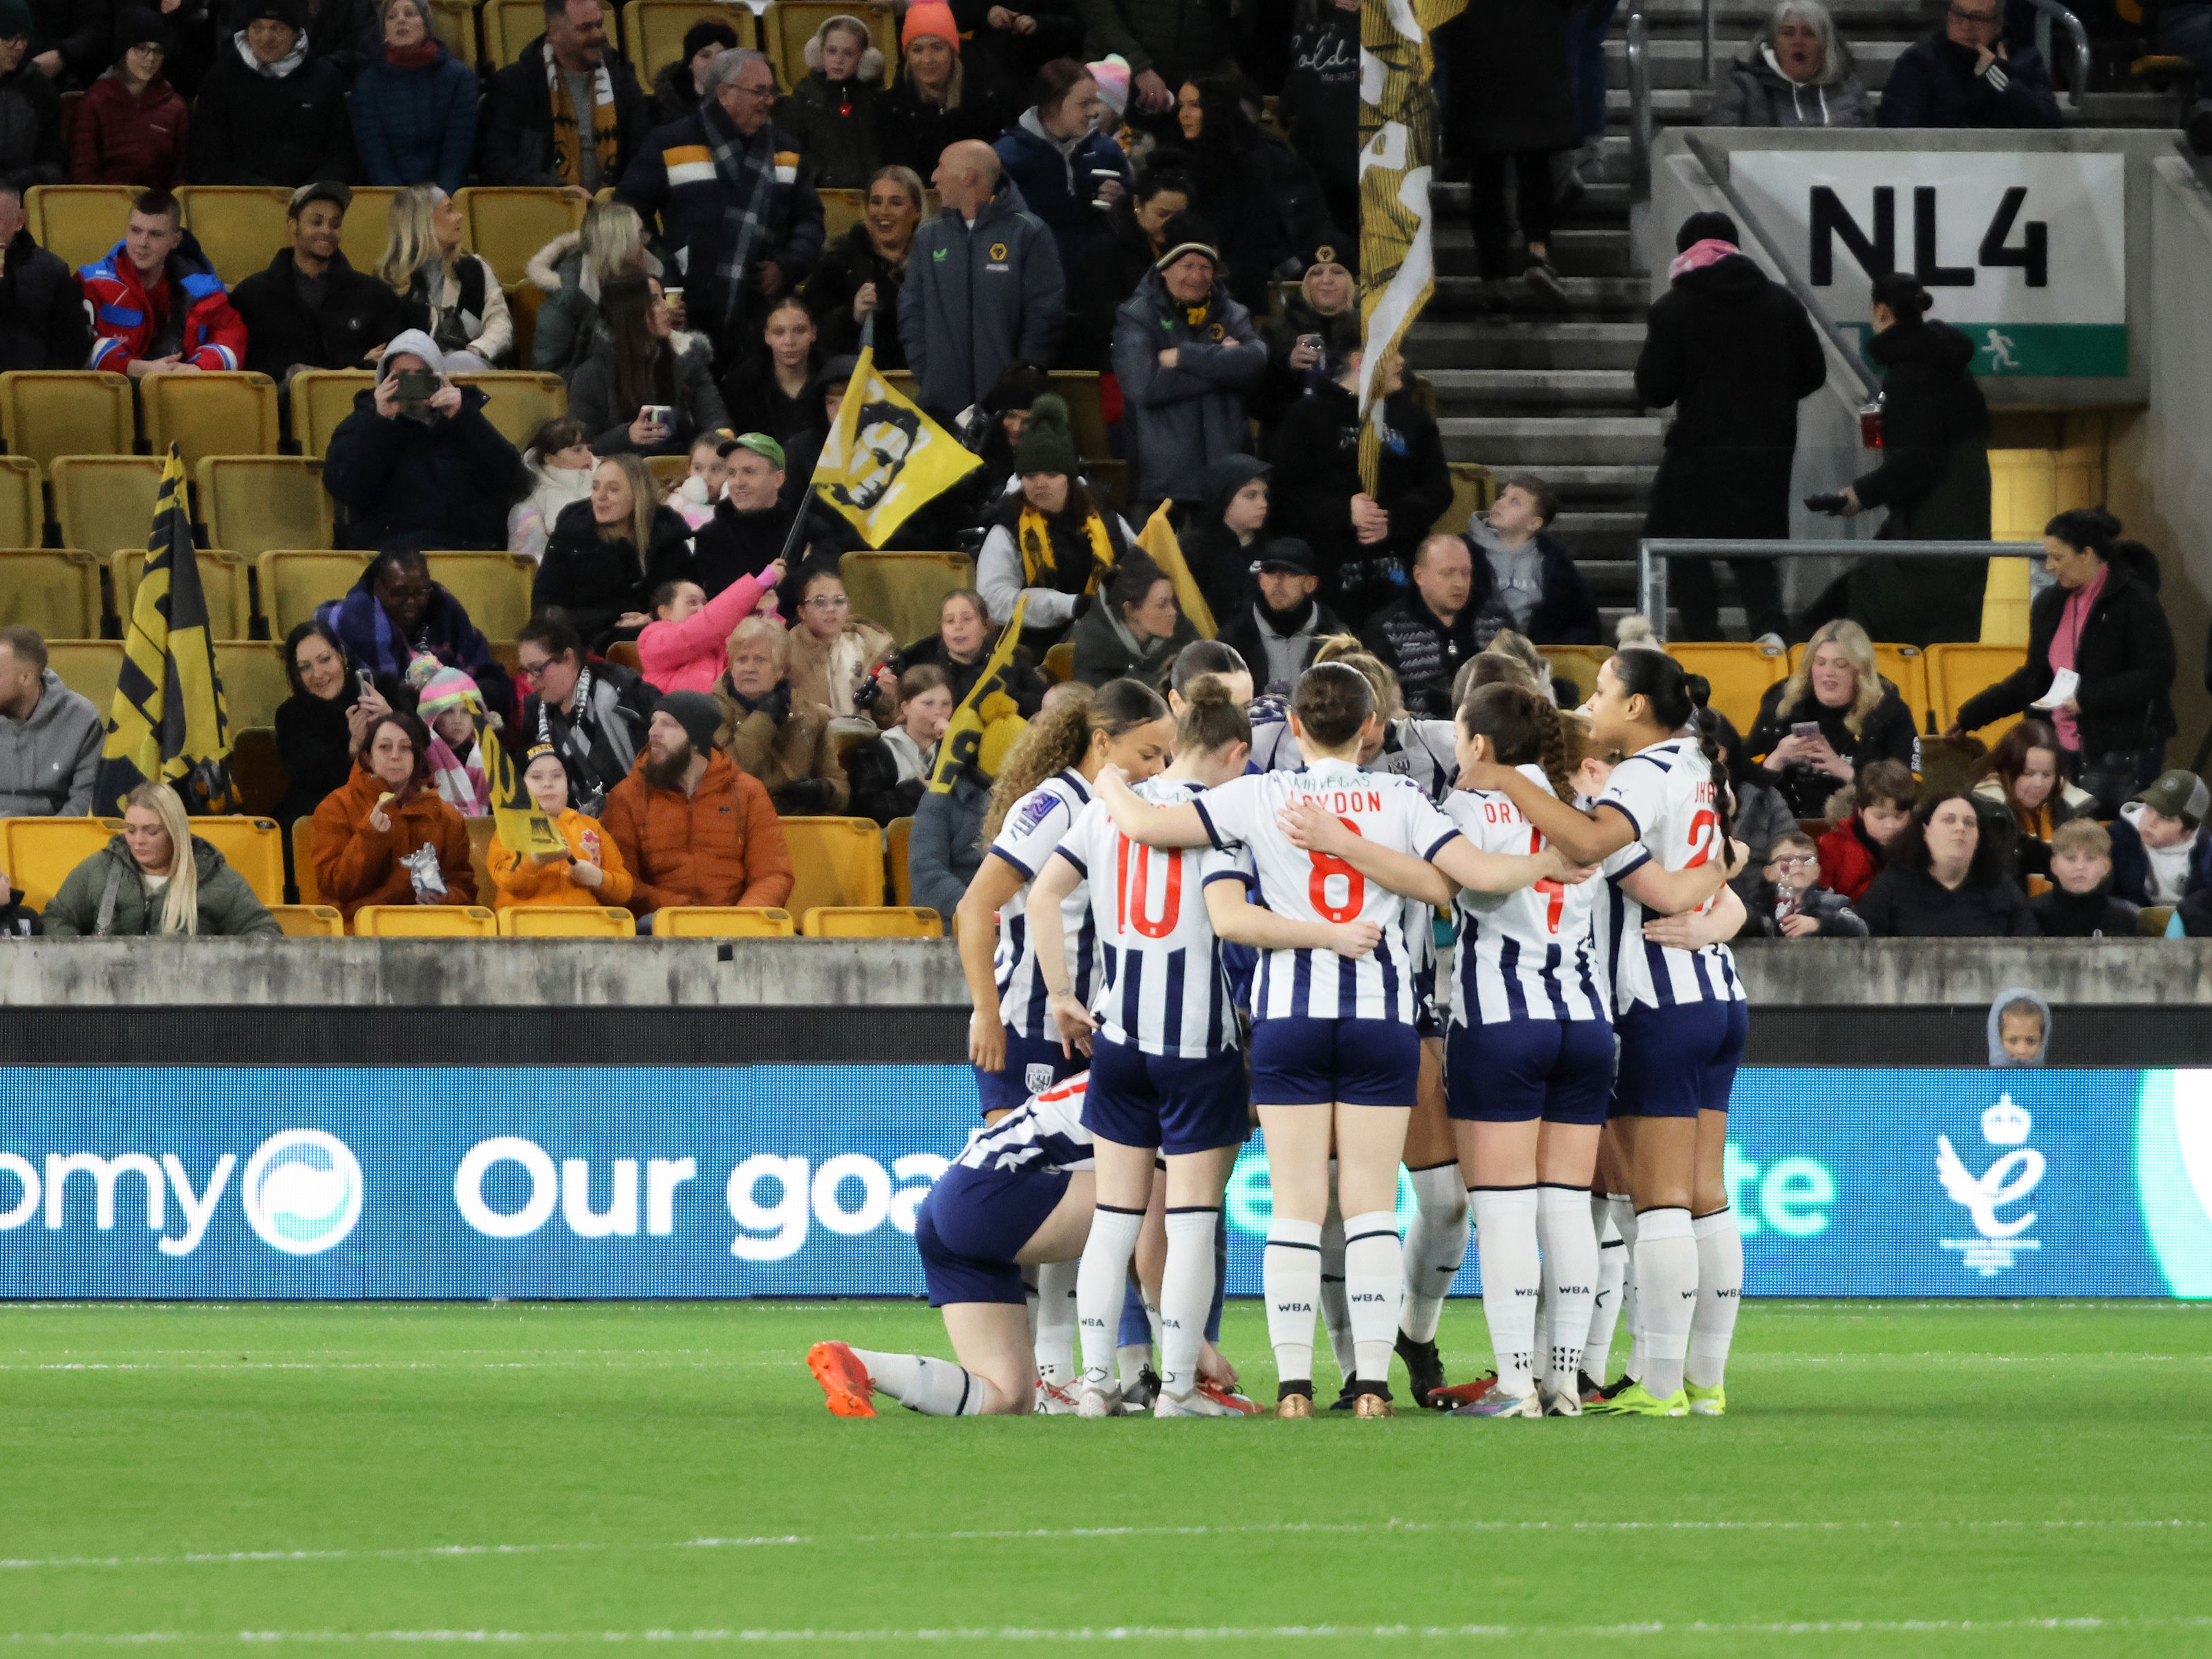 An image showing Albion Women in a team huddle at Molineux